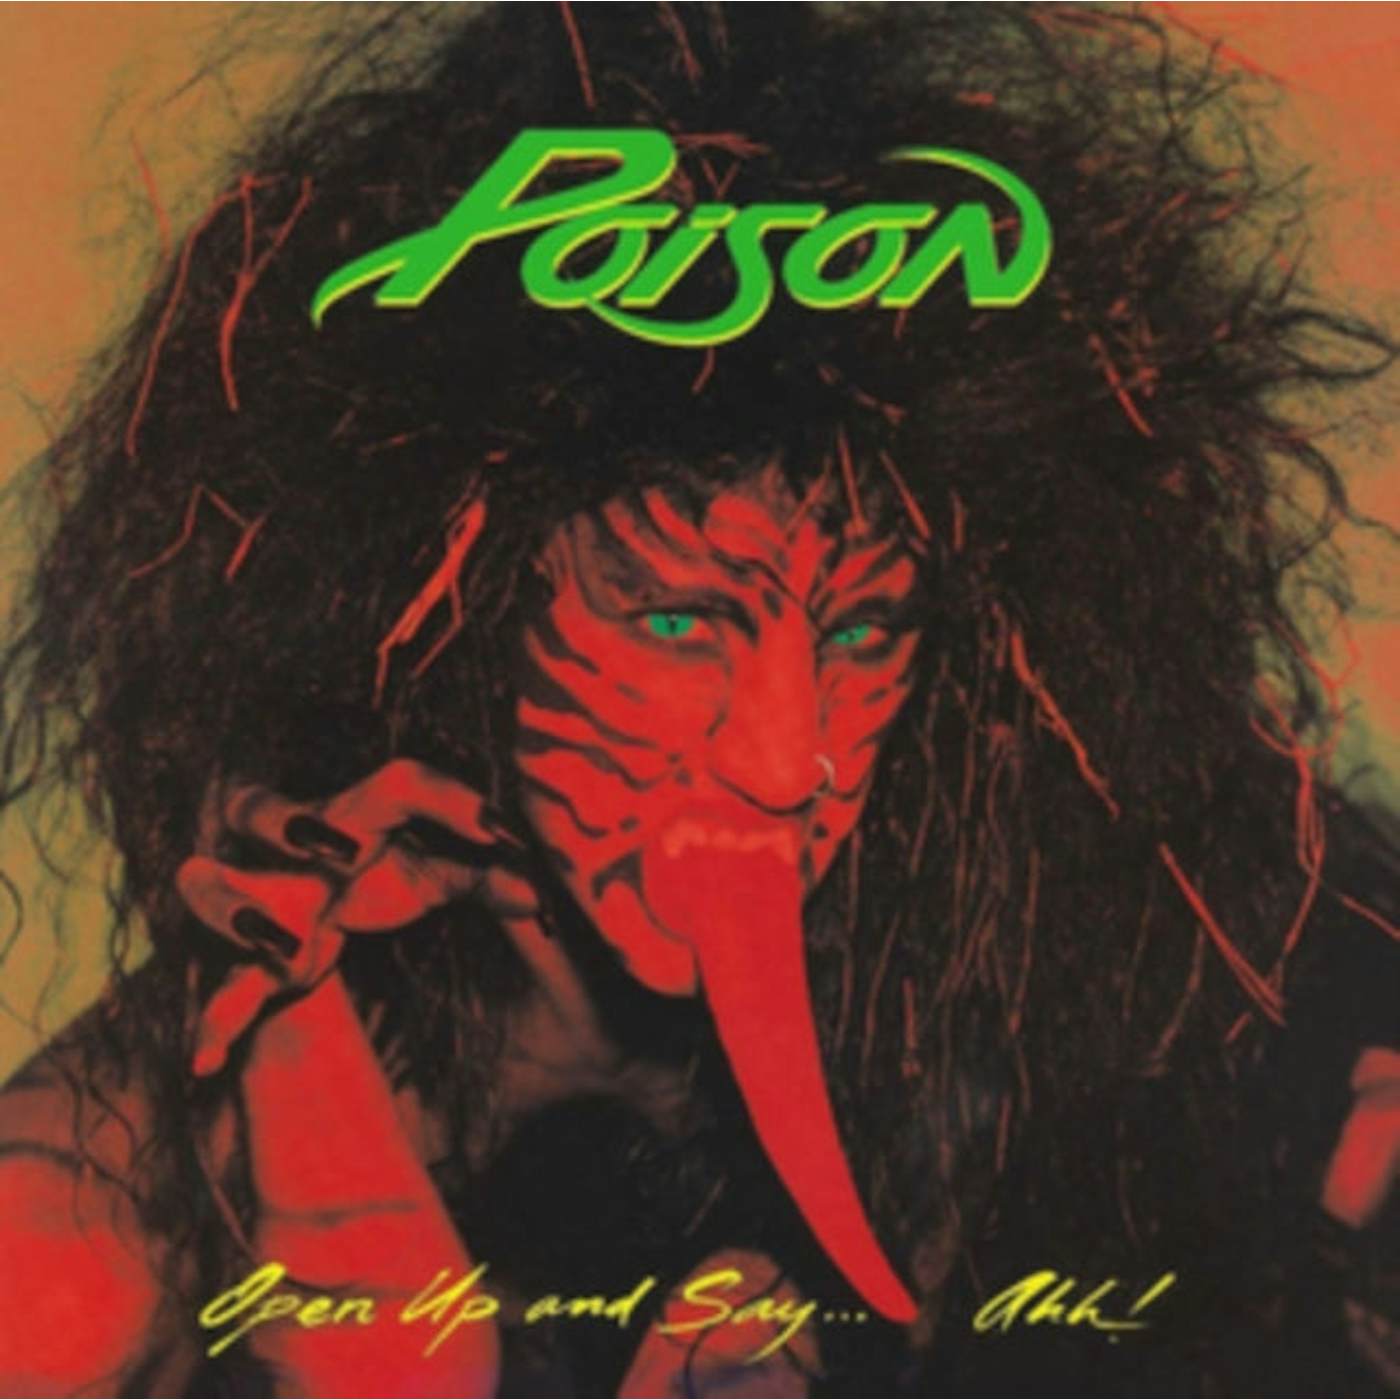 Poison LP Vinyl Record - Open Up And Say